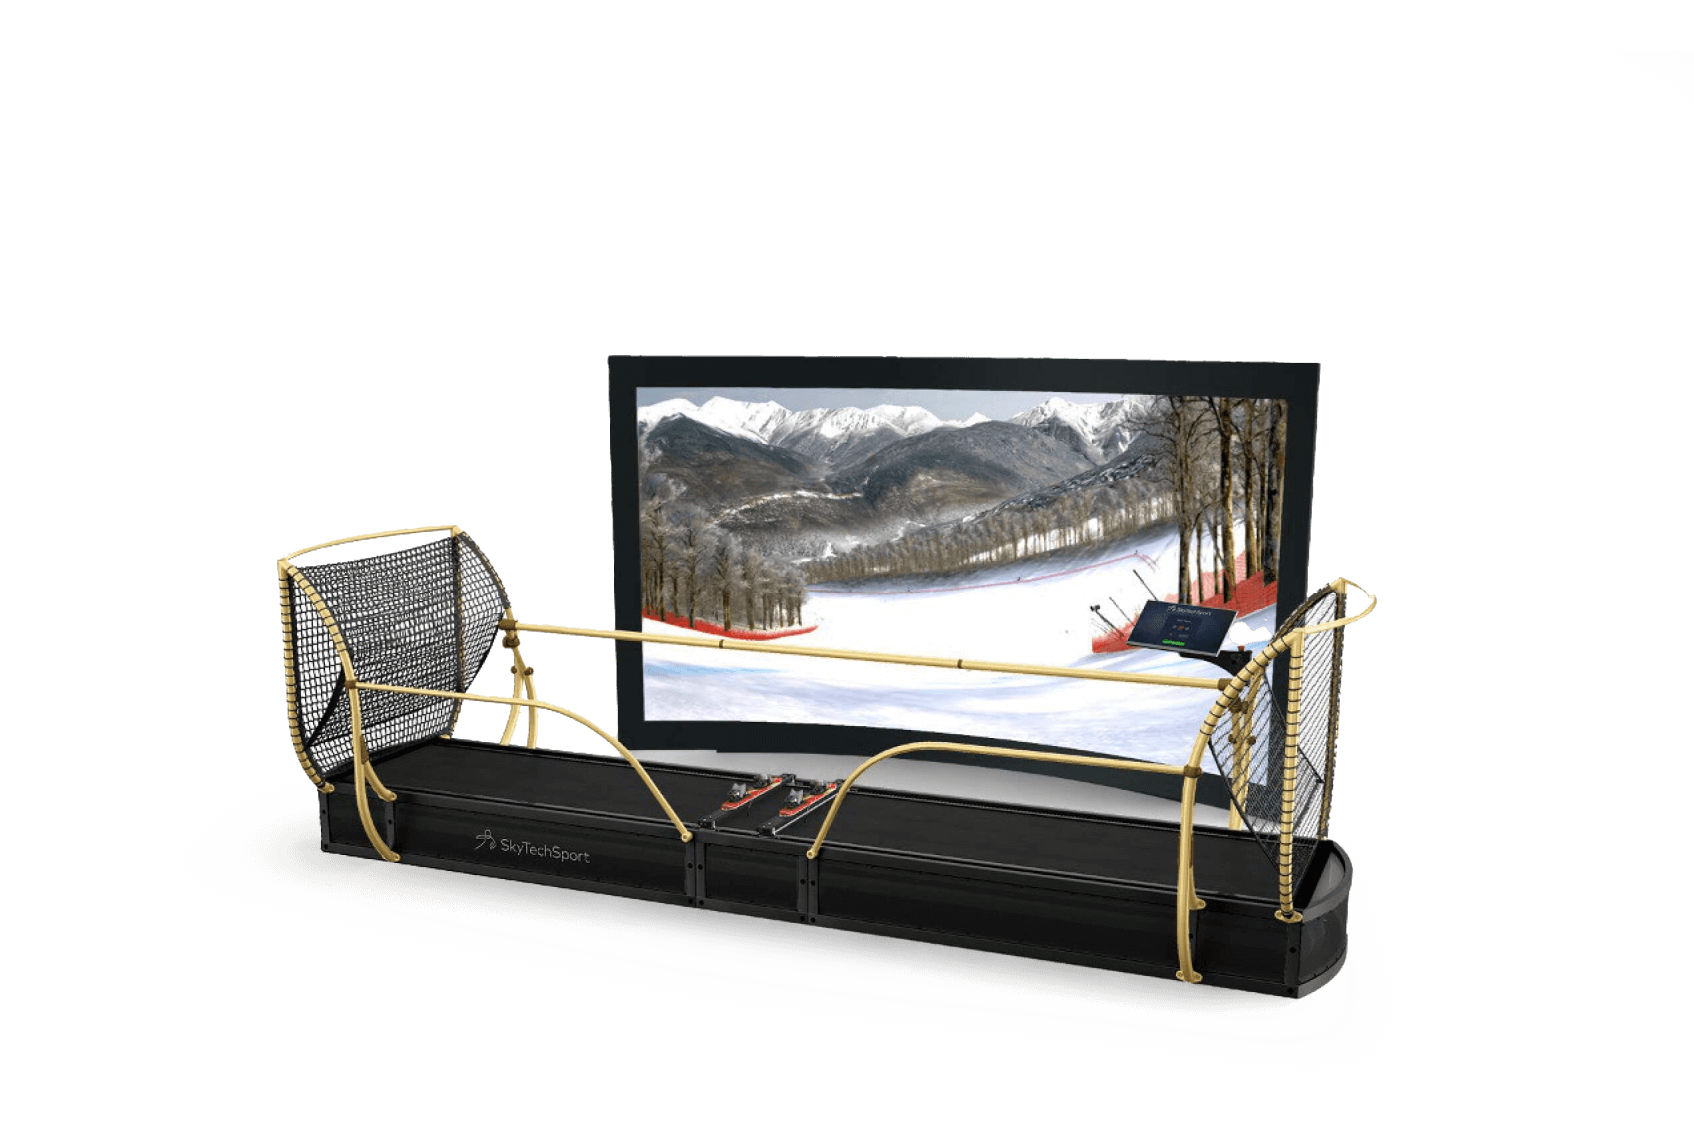 Order luxury ski simulators with virtual ski slopes with fast delivery across the Middle East!